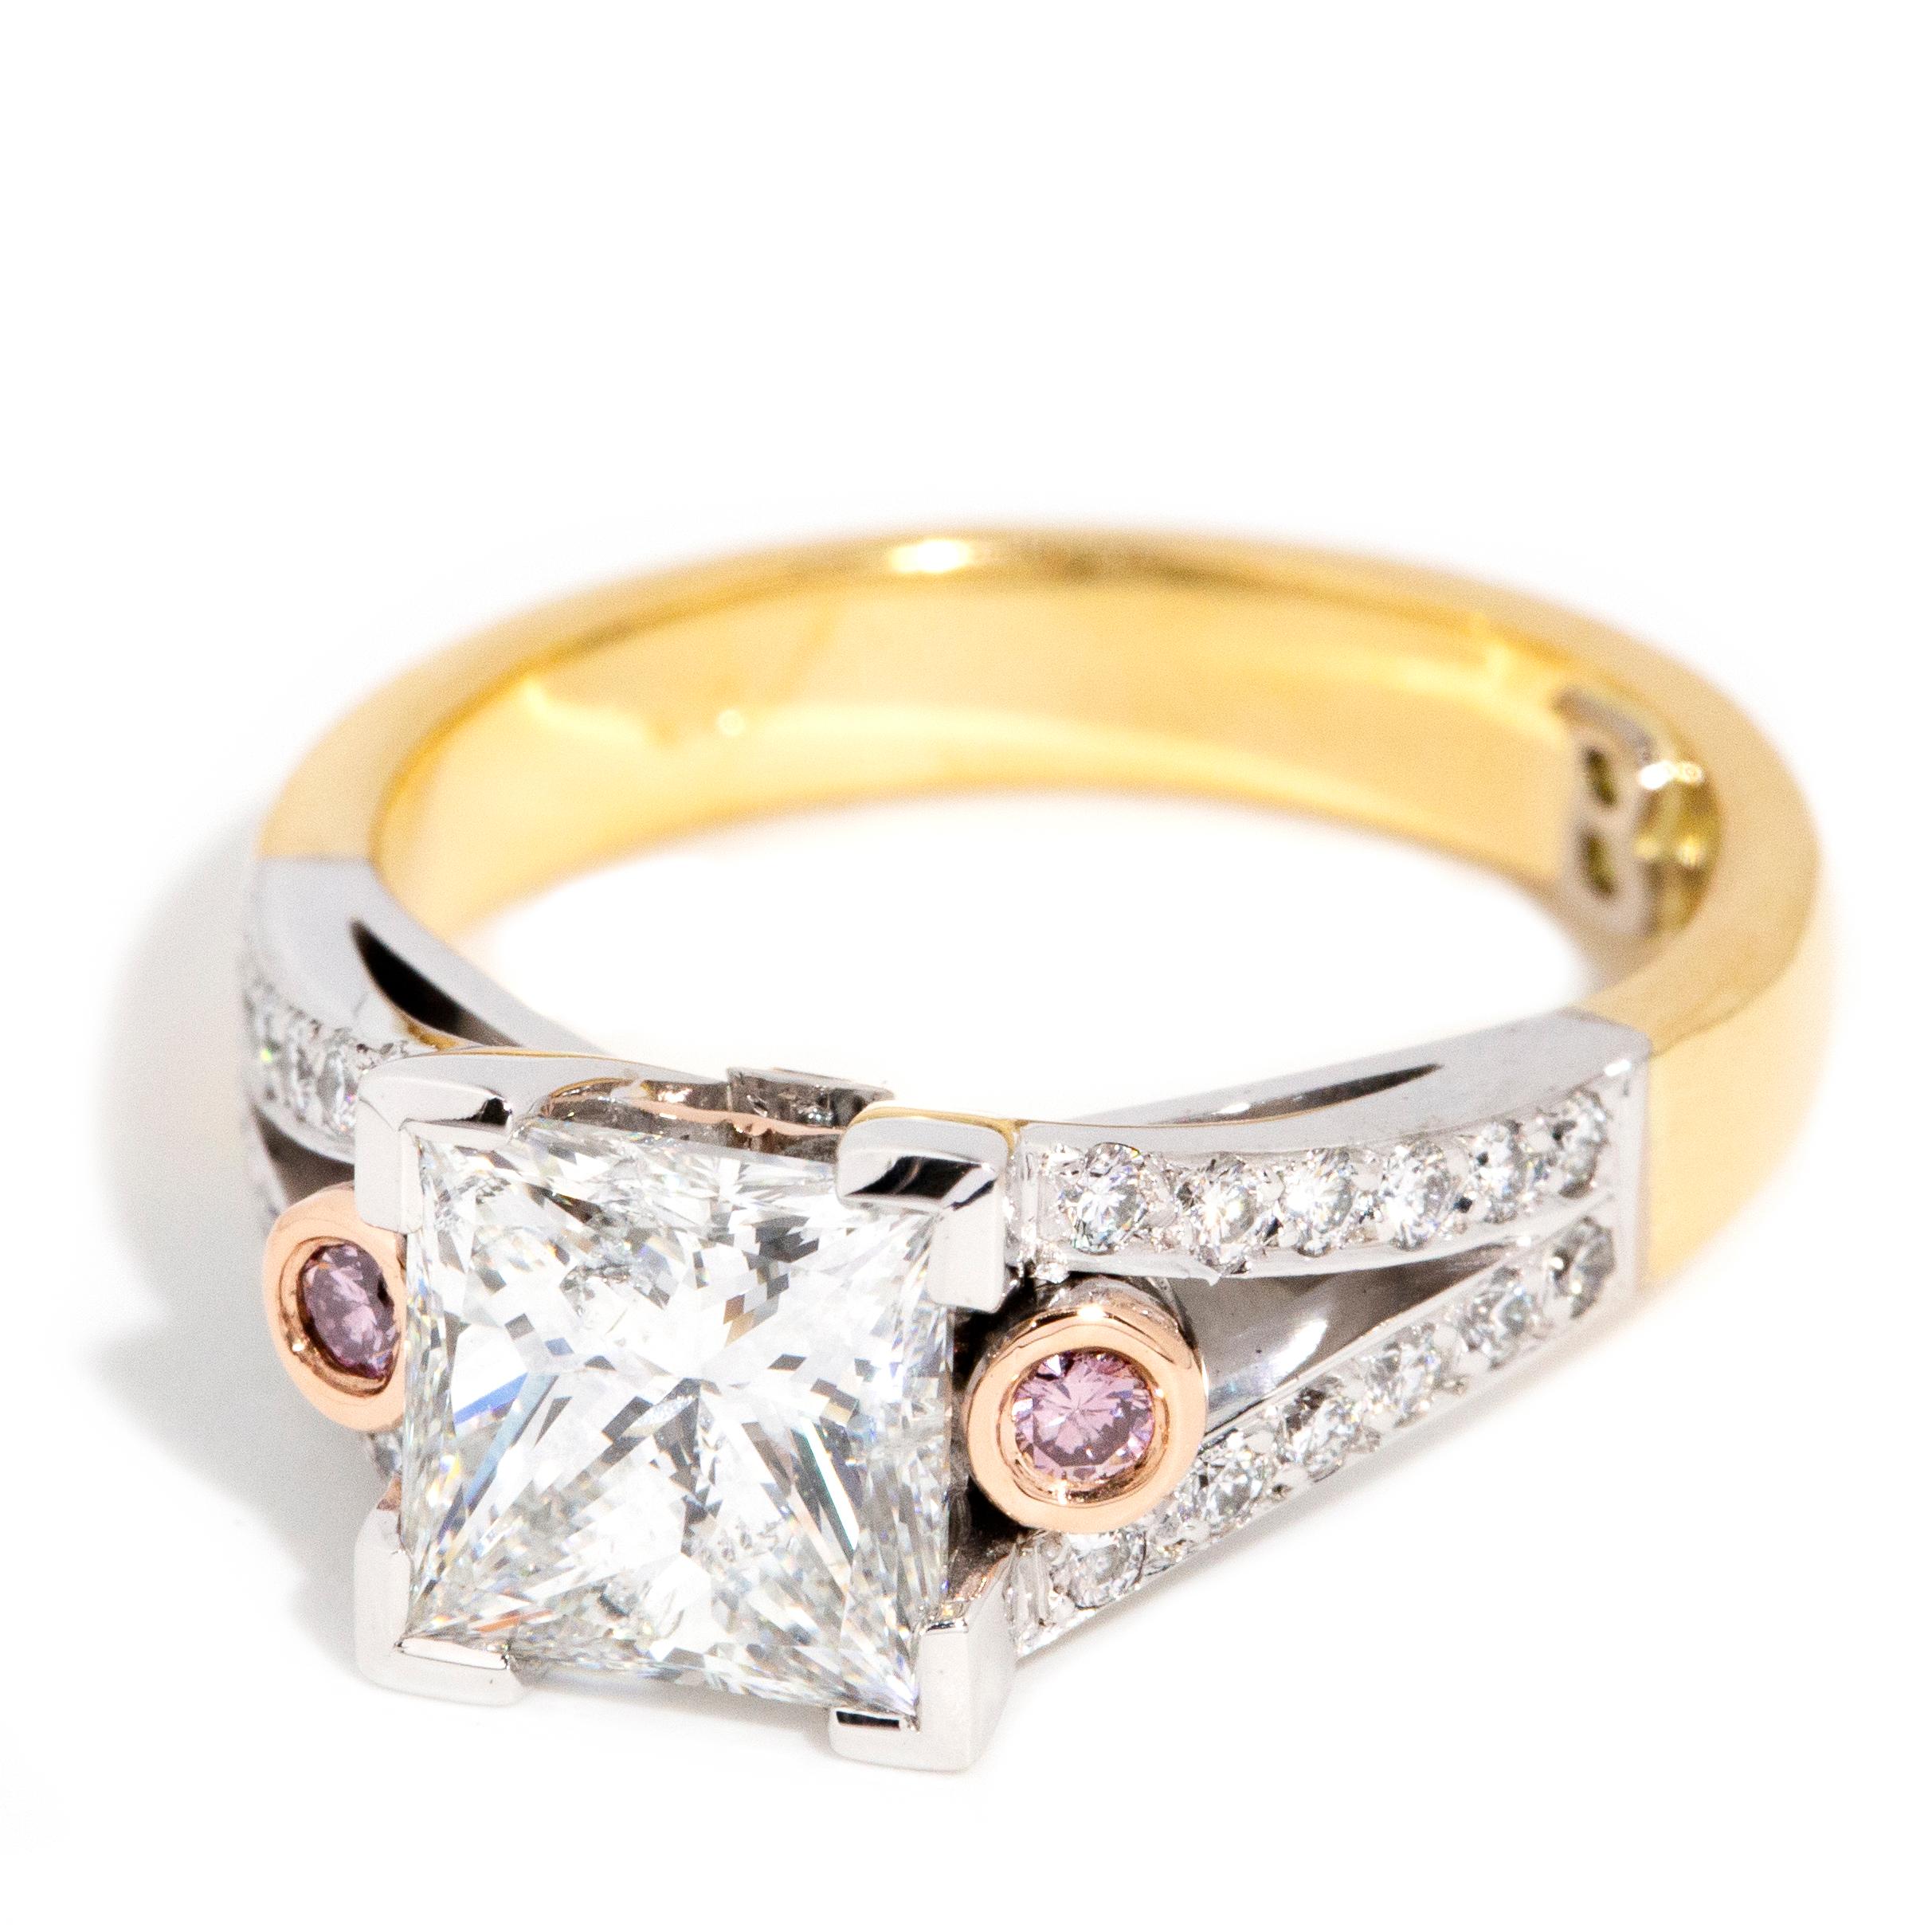 Contemporary 2.04 Carat Princess Diamond Two Tone 18 Carat Gold Engagement Ring In Good Condition For Sale In Hamilton, AU